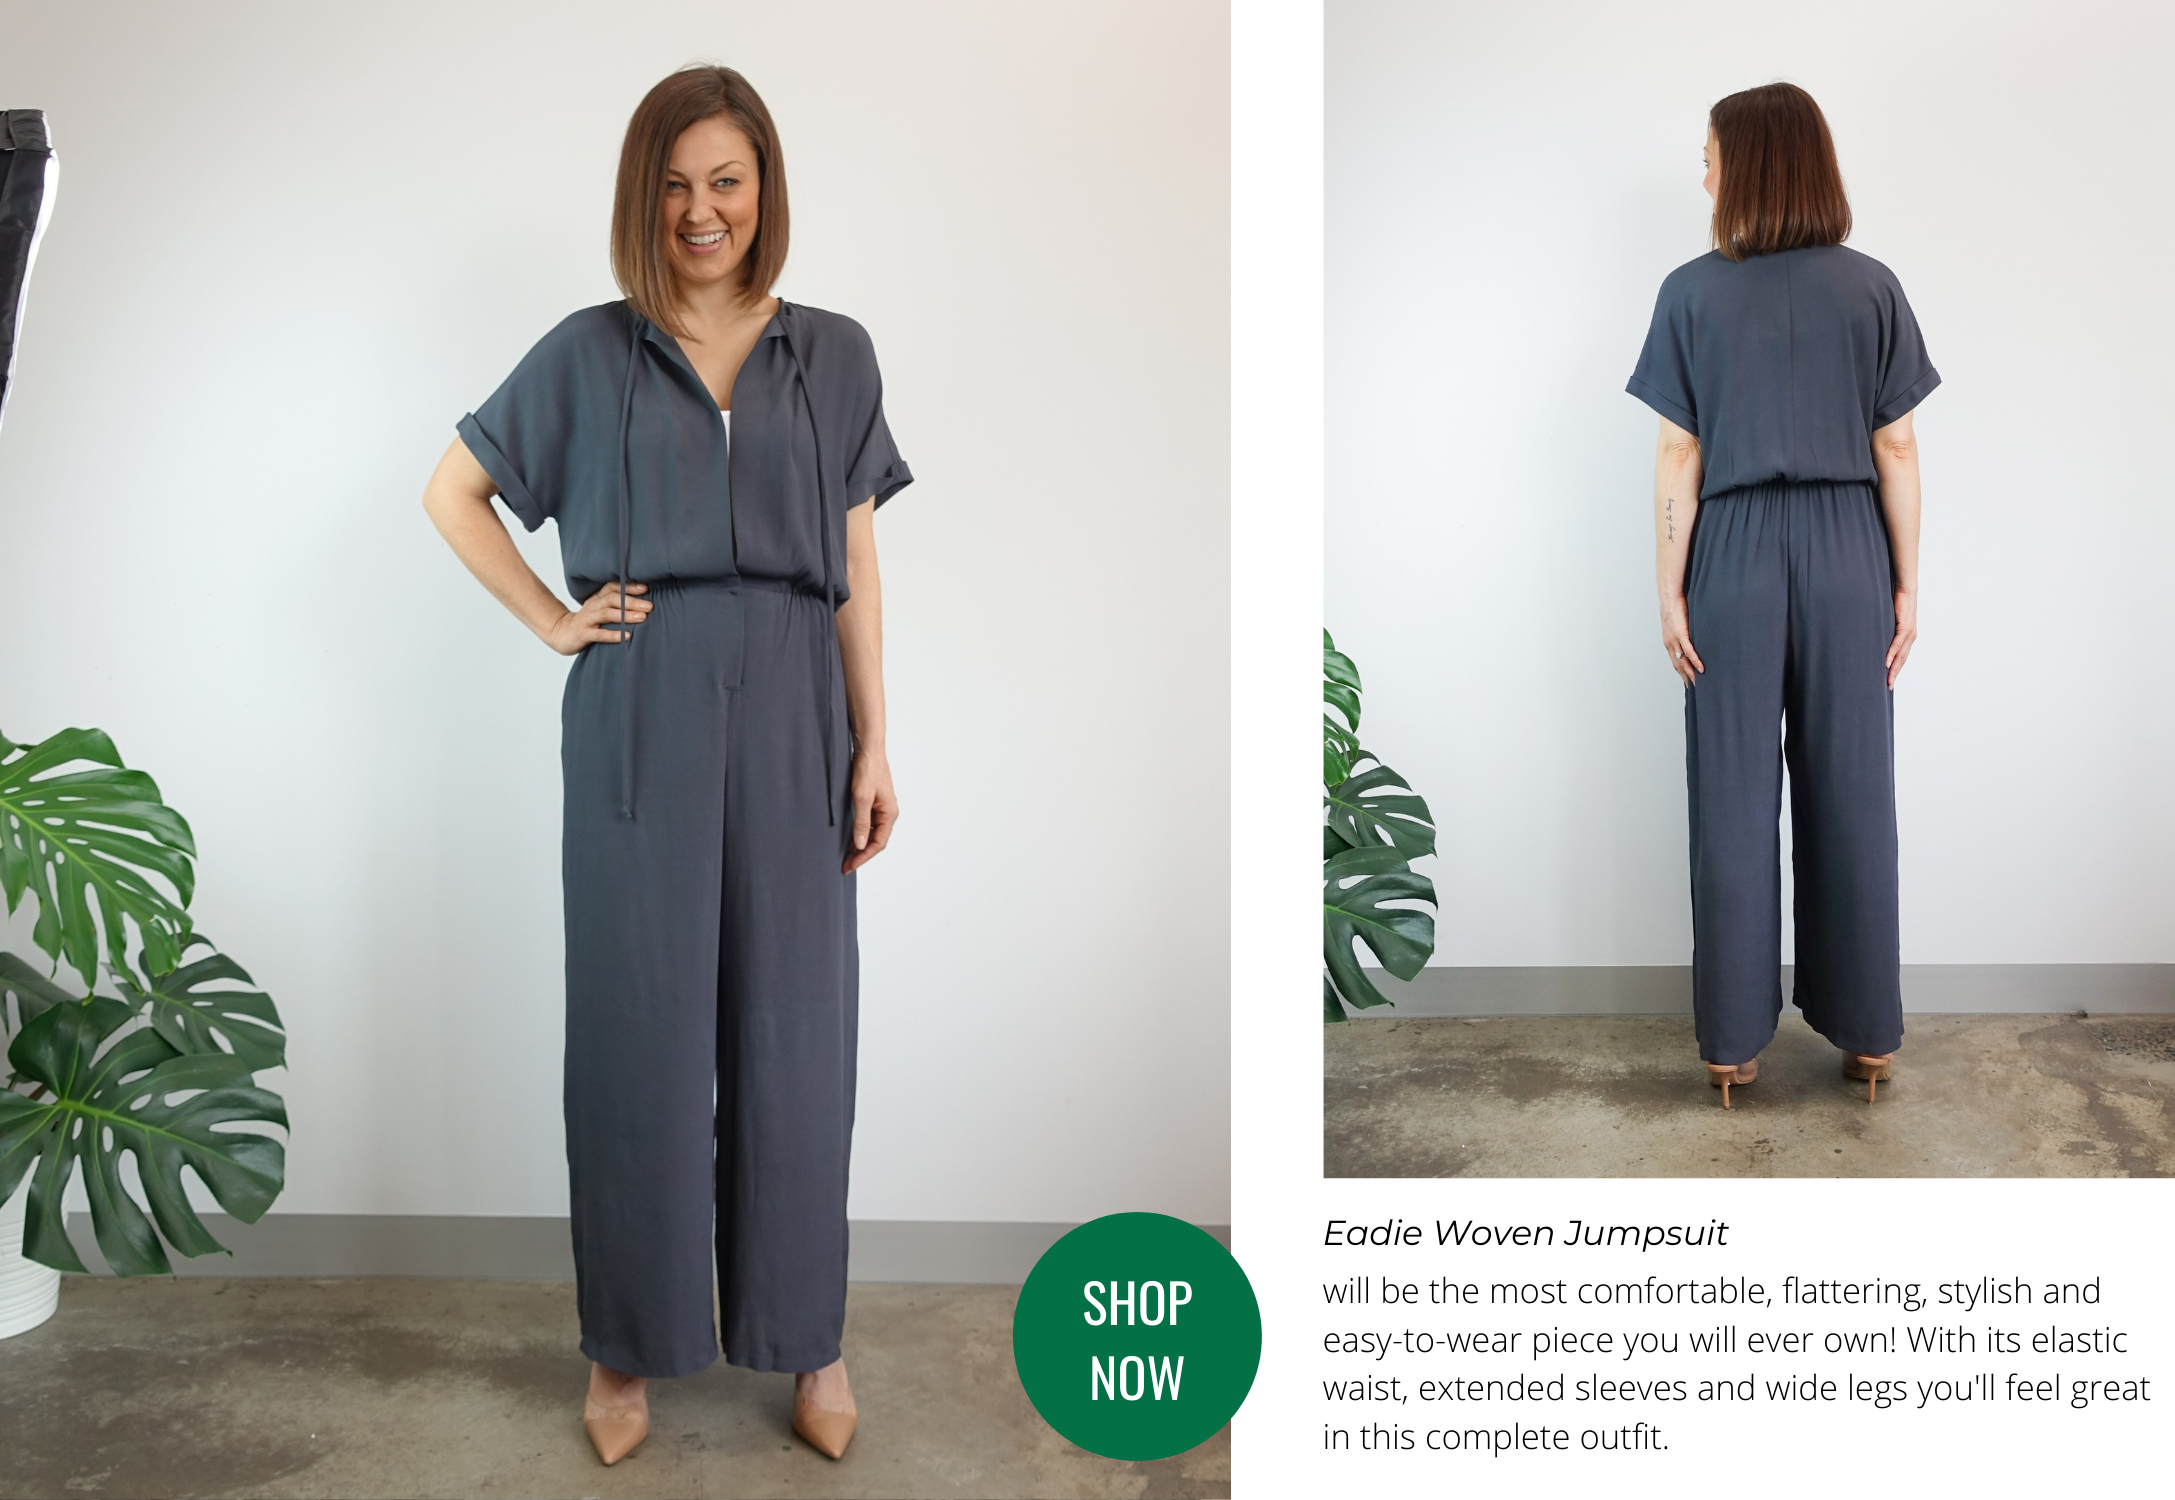 Style Arc's latest release - Eadie Woven Jumpsuit and Dress